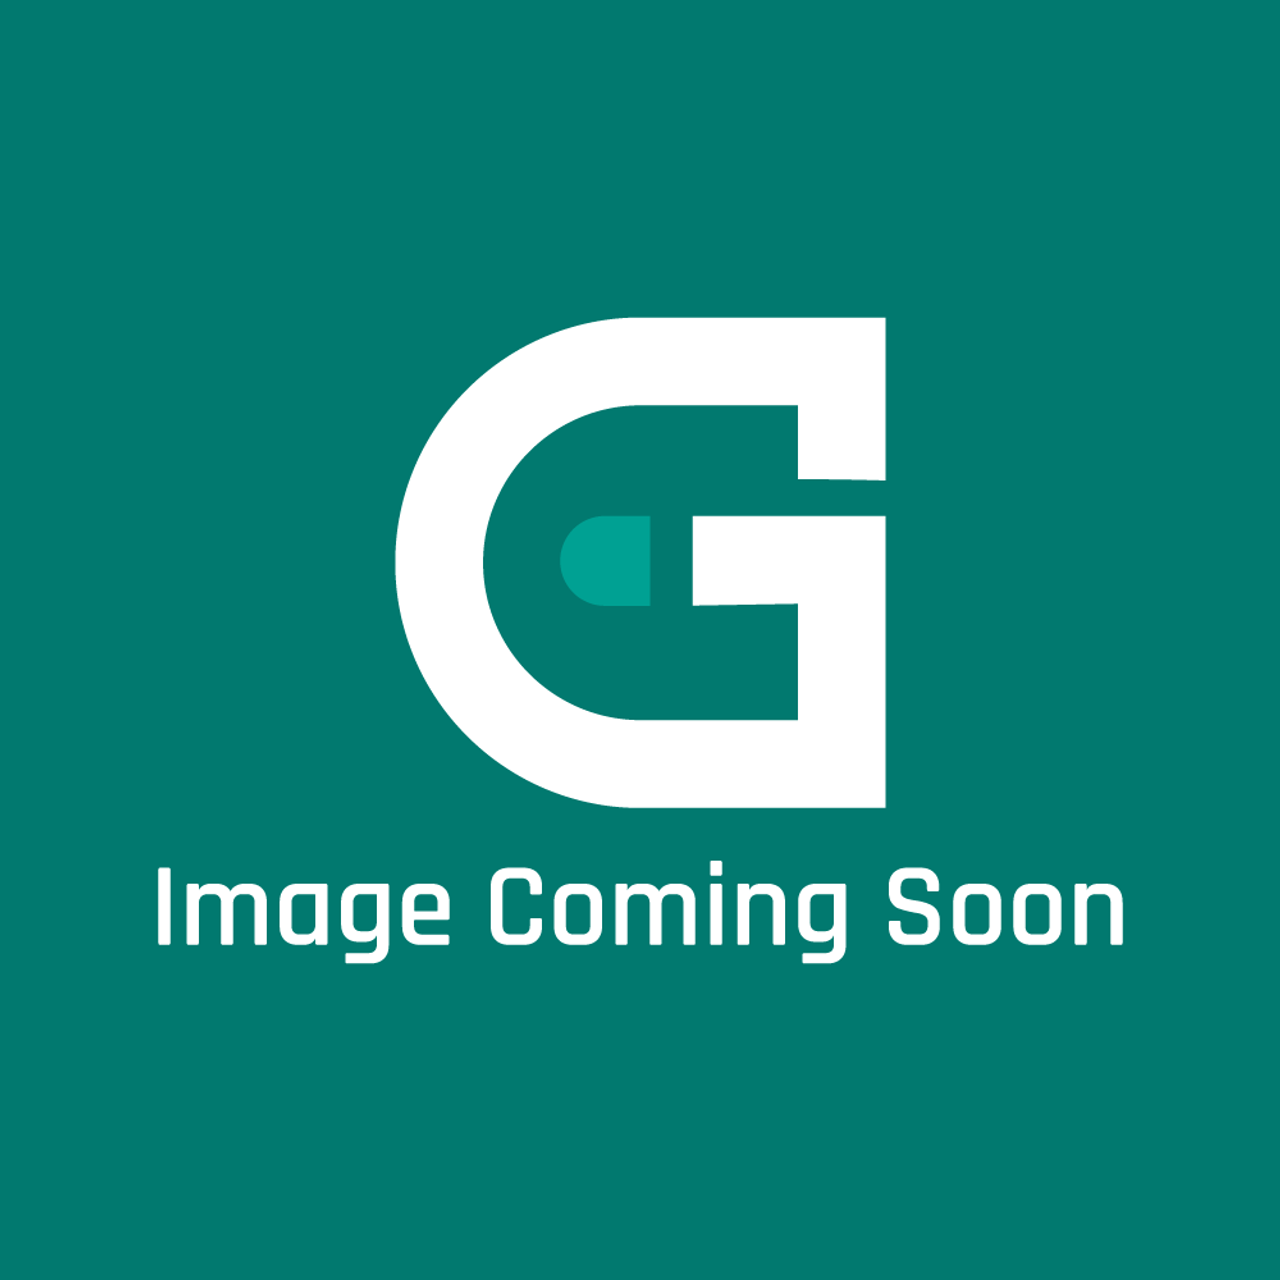 GE Appliances WH46X20822 - Front Panel Ww - Image Coming Soon!